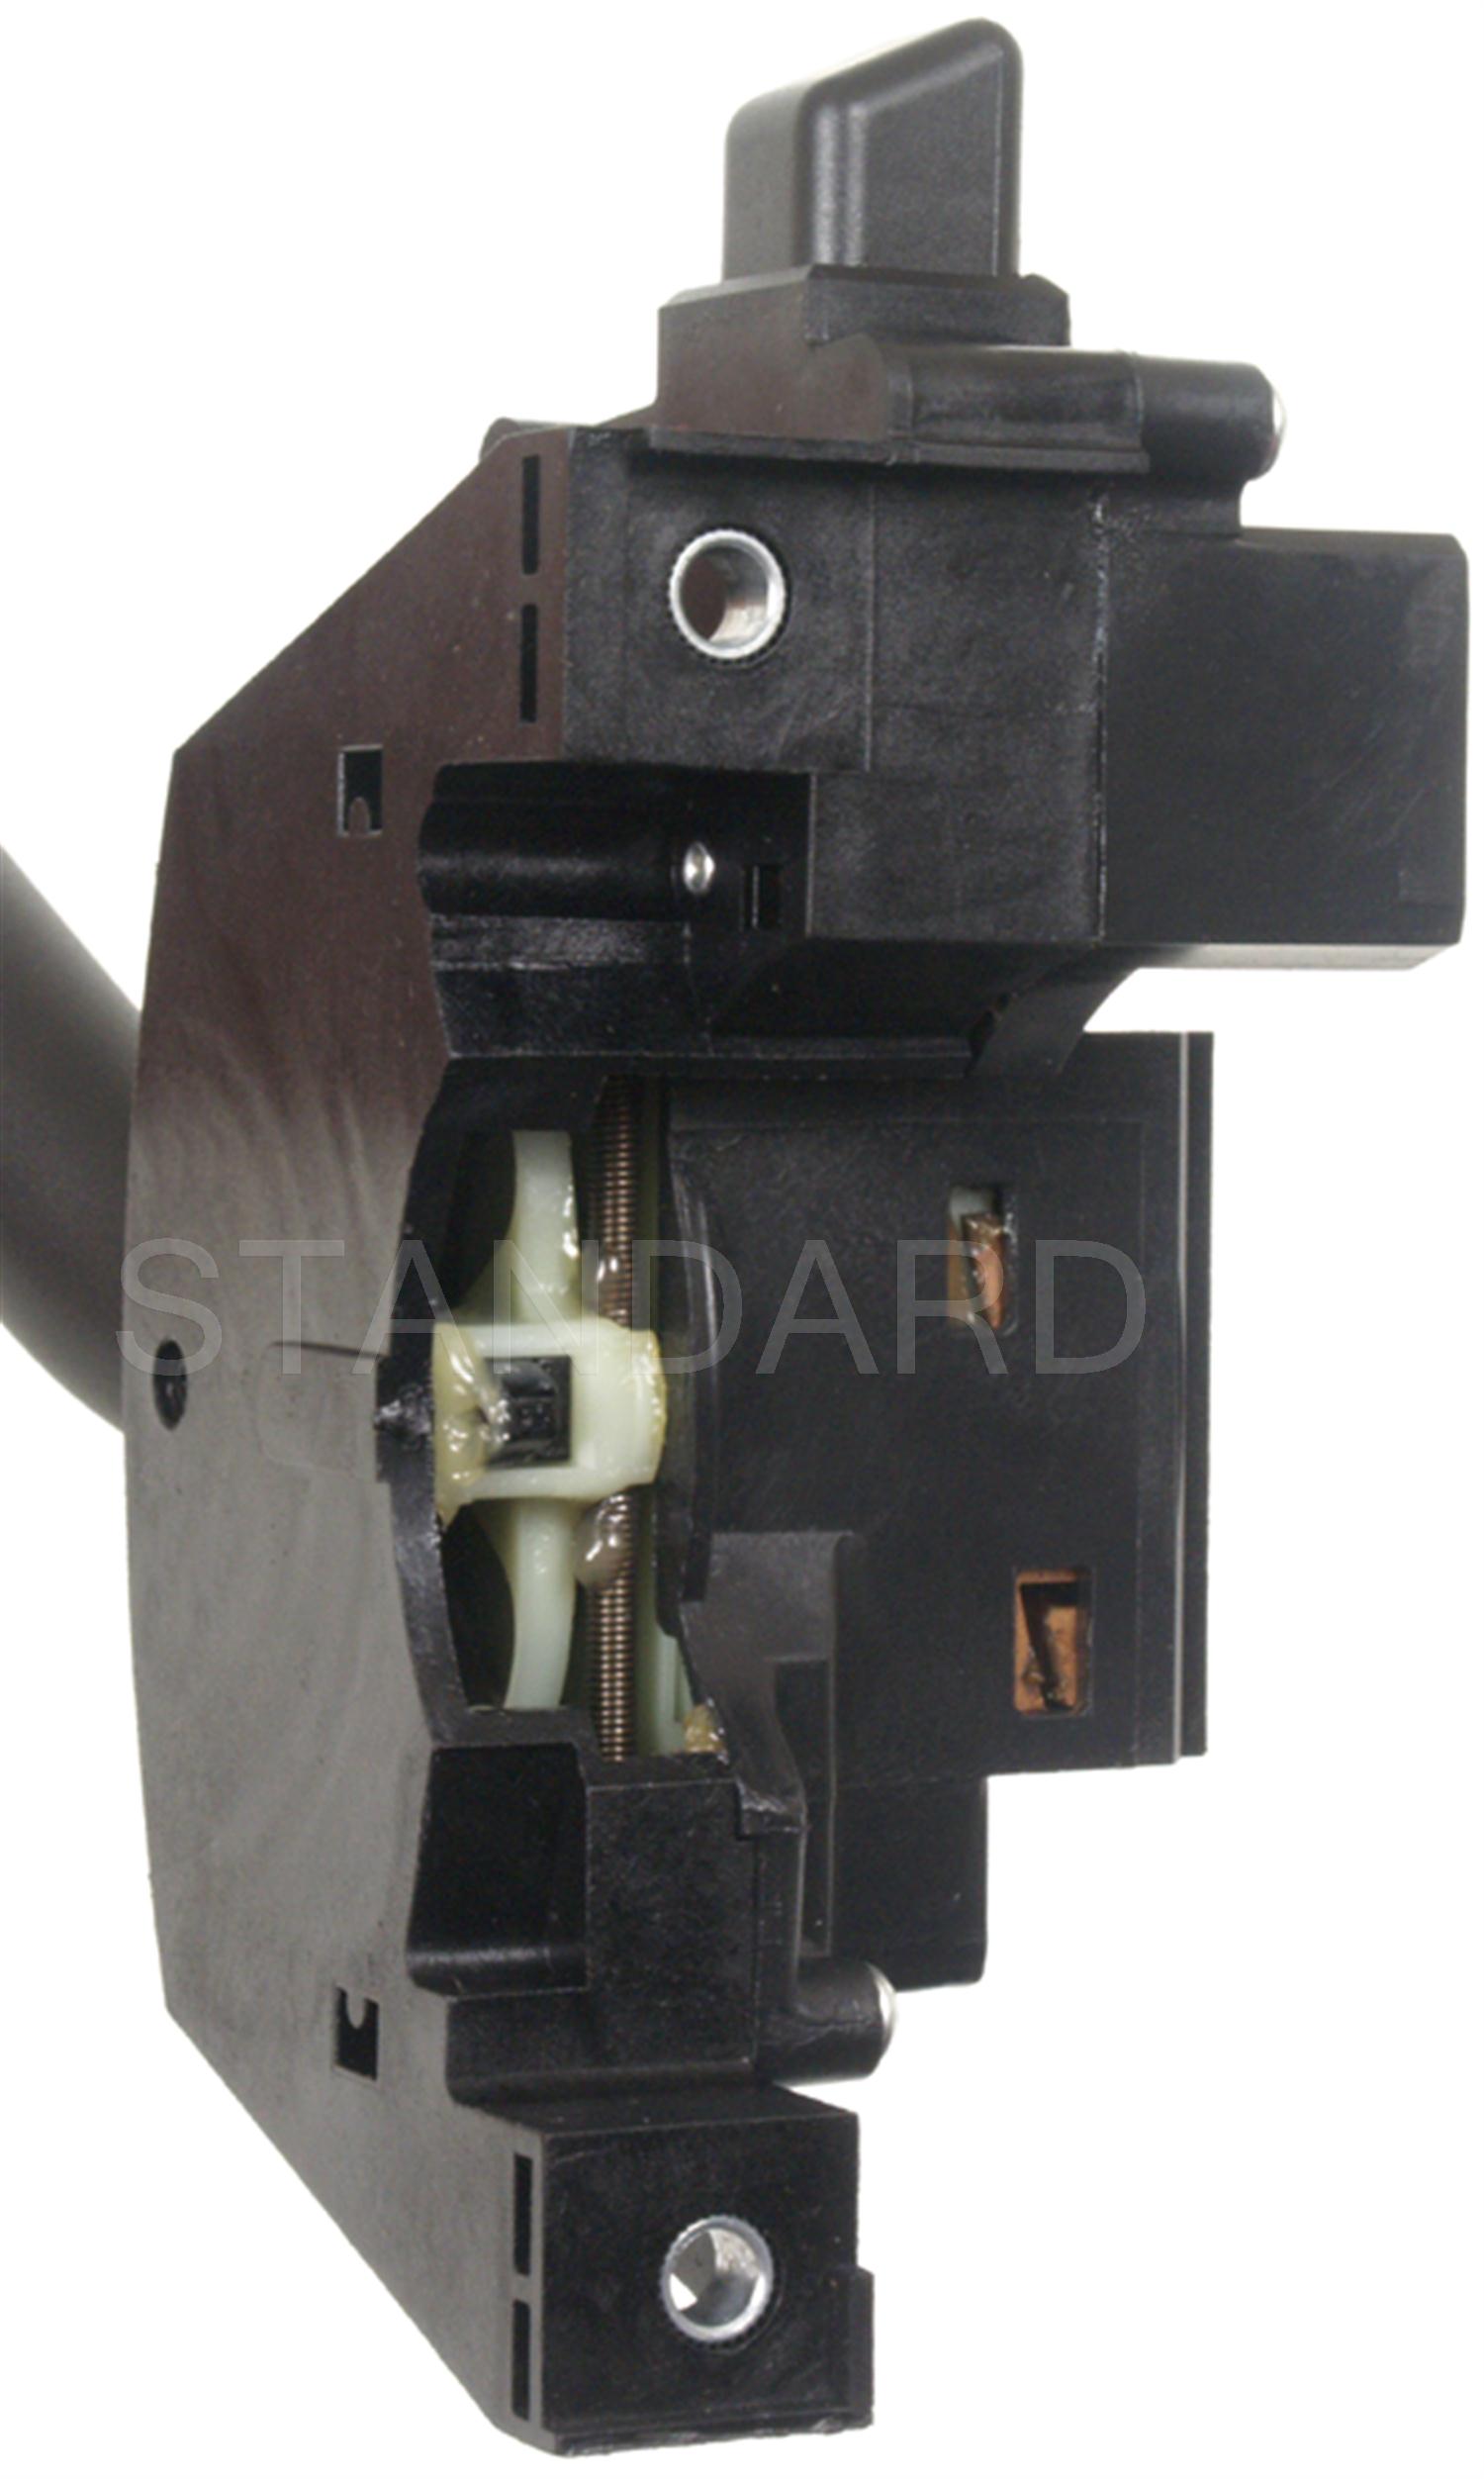 Show details for Standard Motor Products CBS1159 Standard Motors Cbs1159 Combination Switch